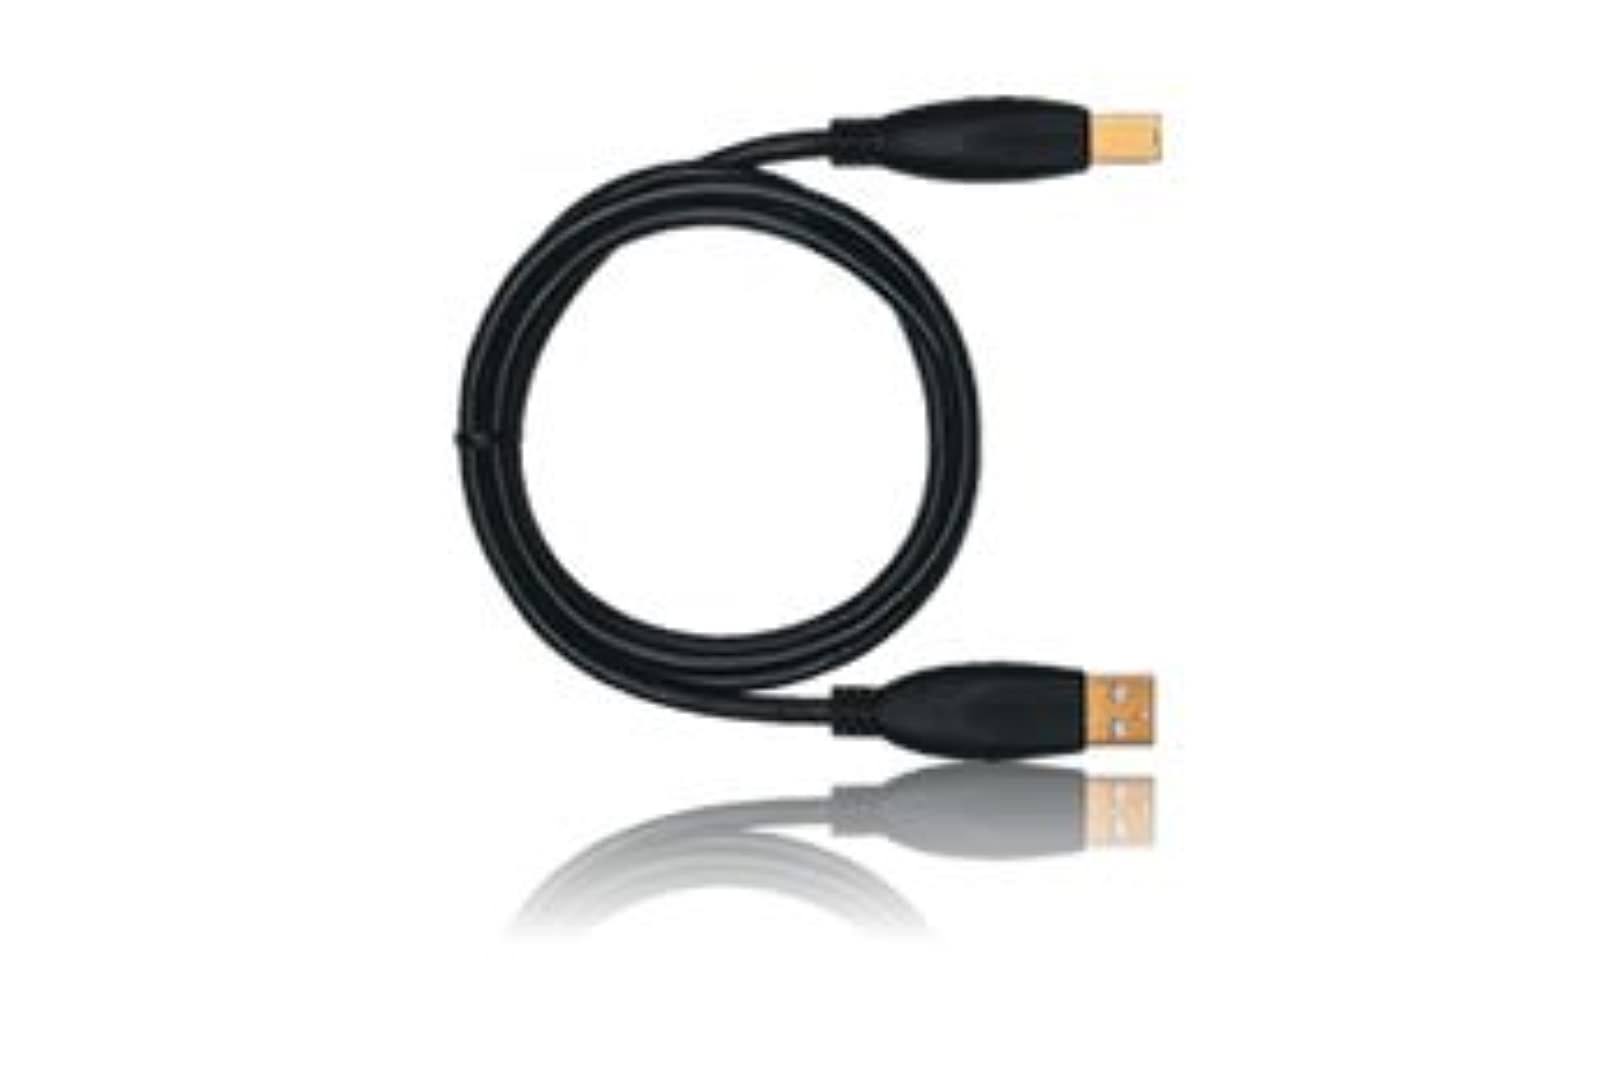 Gigaware 3ft Usb-a to Usb-b Male Cable 2600712 Black Pkg 1